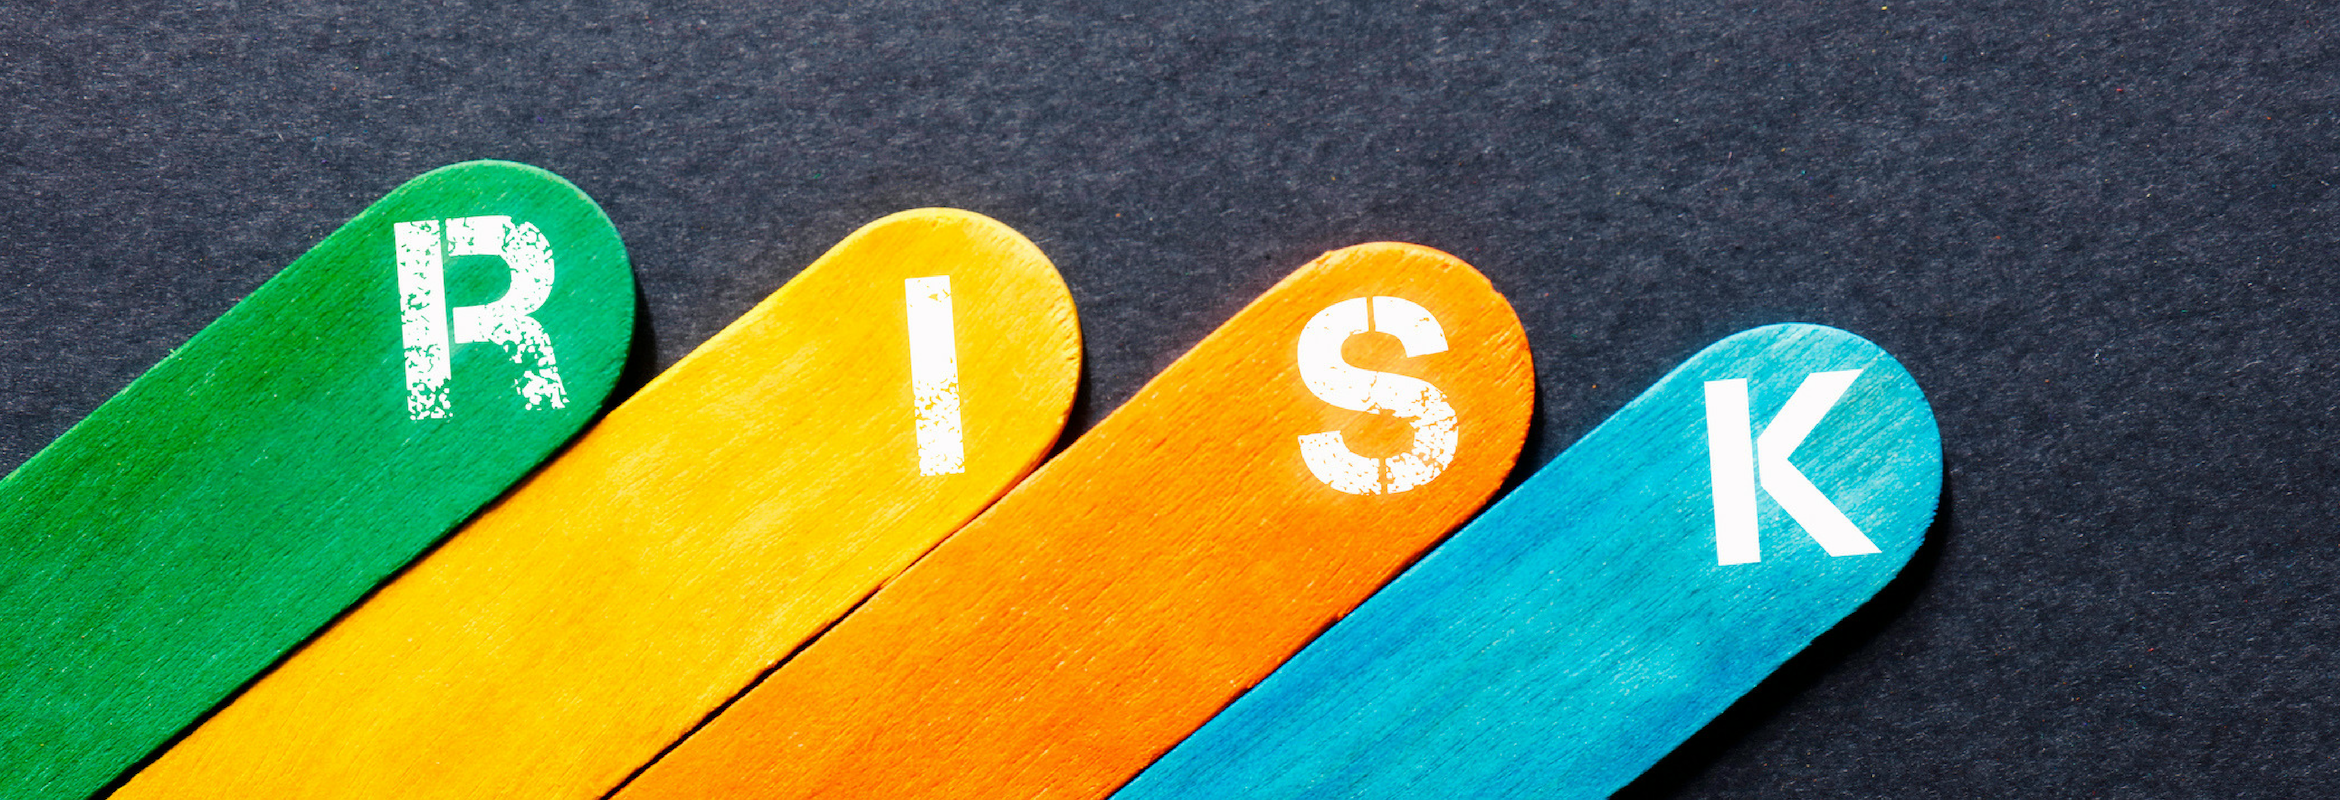 Risk spelled out on individual colored sticks on a black background. 